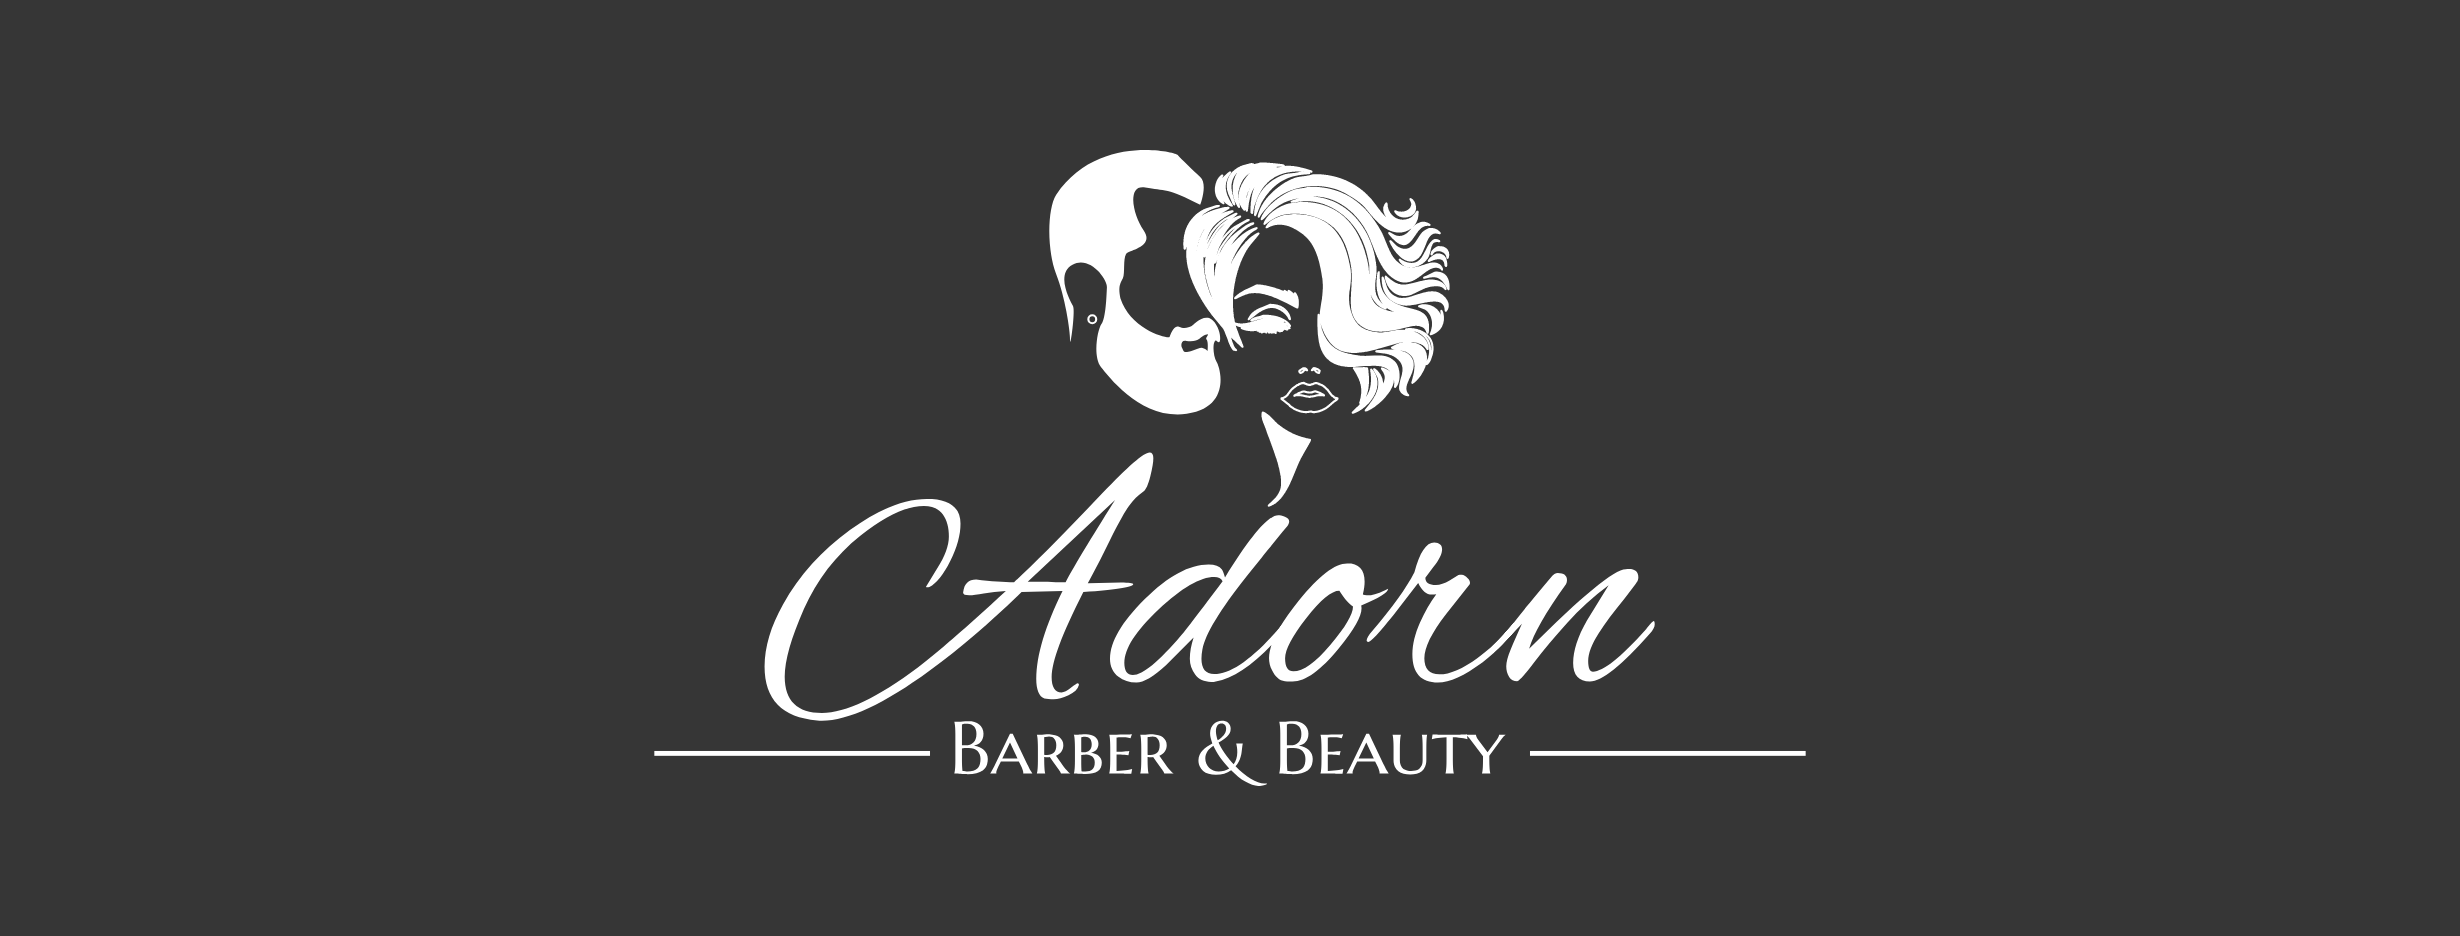 Adorn Barber & Beauty 906 Crossings Blvd Suite A, Hopewell Virginia 23860